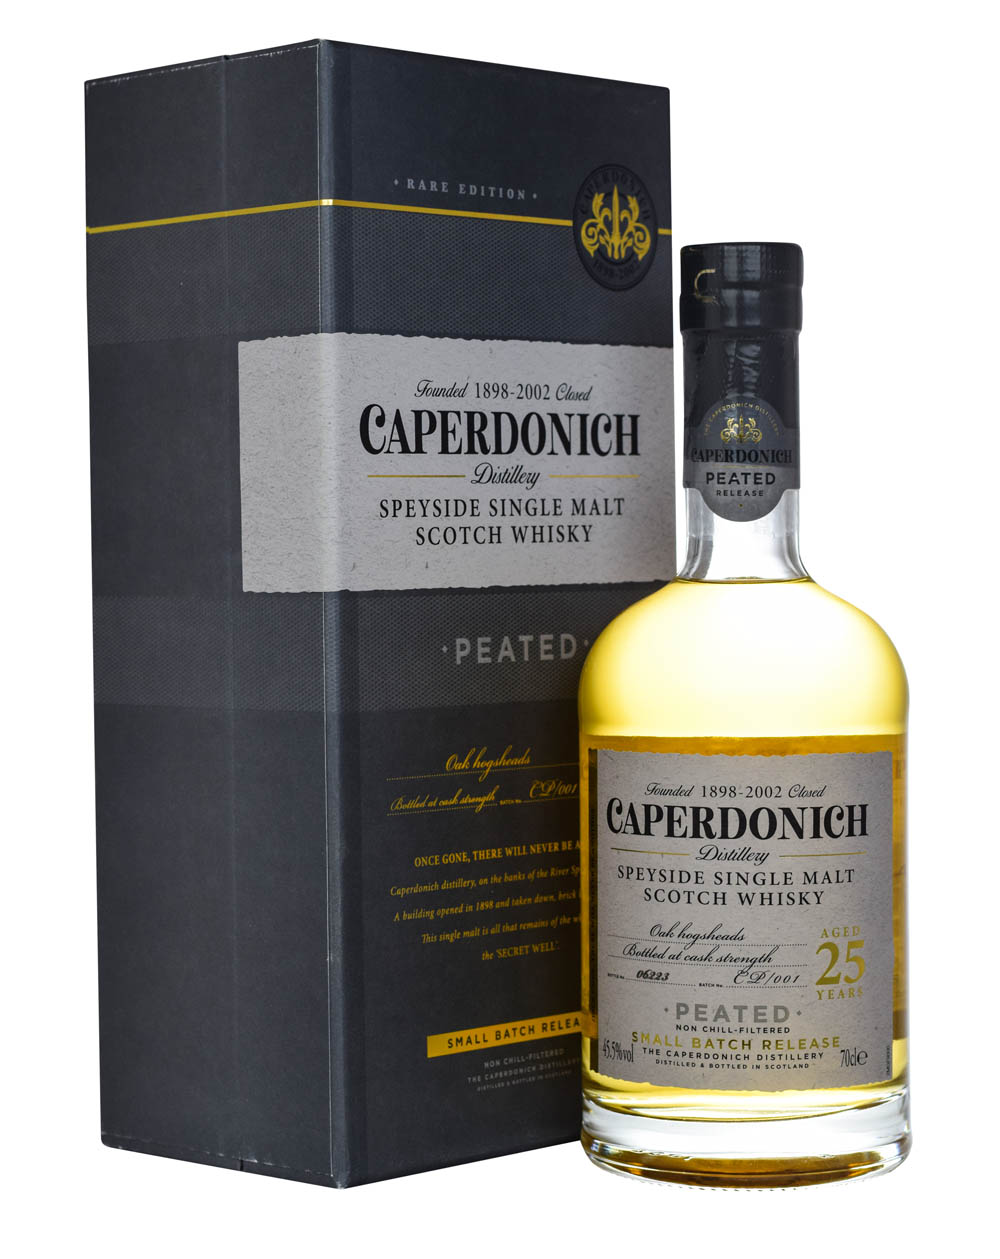 Caperdonich 25 Years Old Peated Small Batch Release Box Musthave Malts MHM